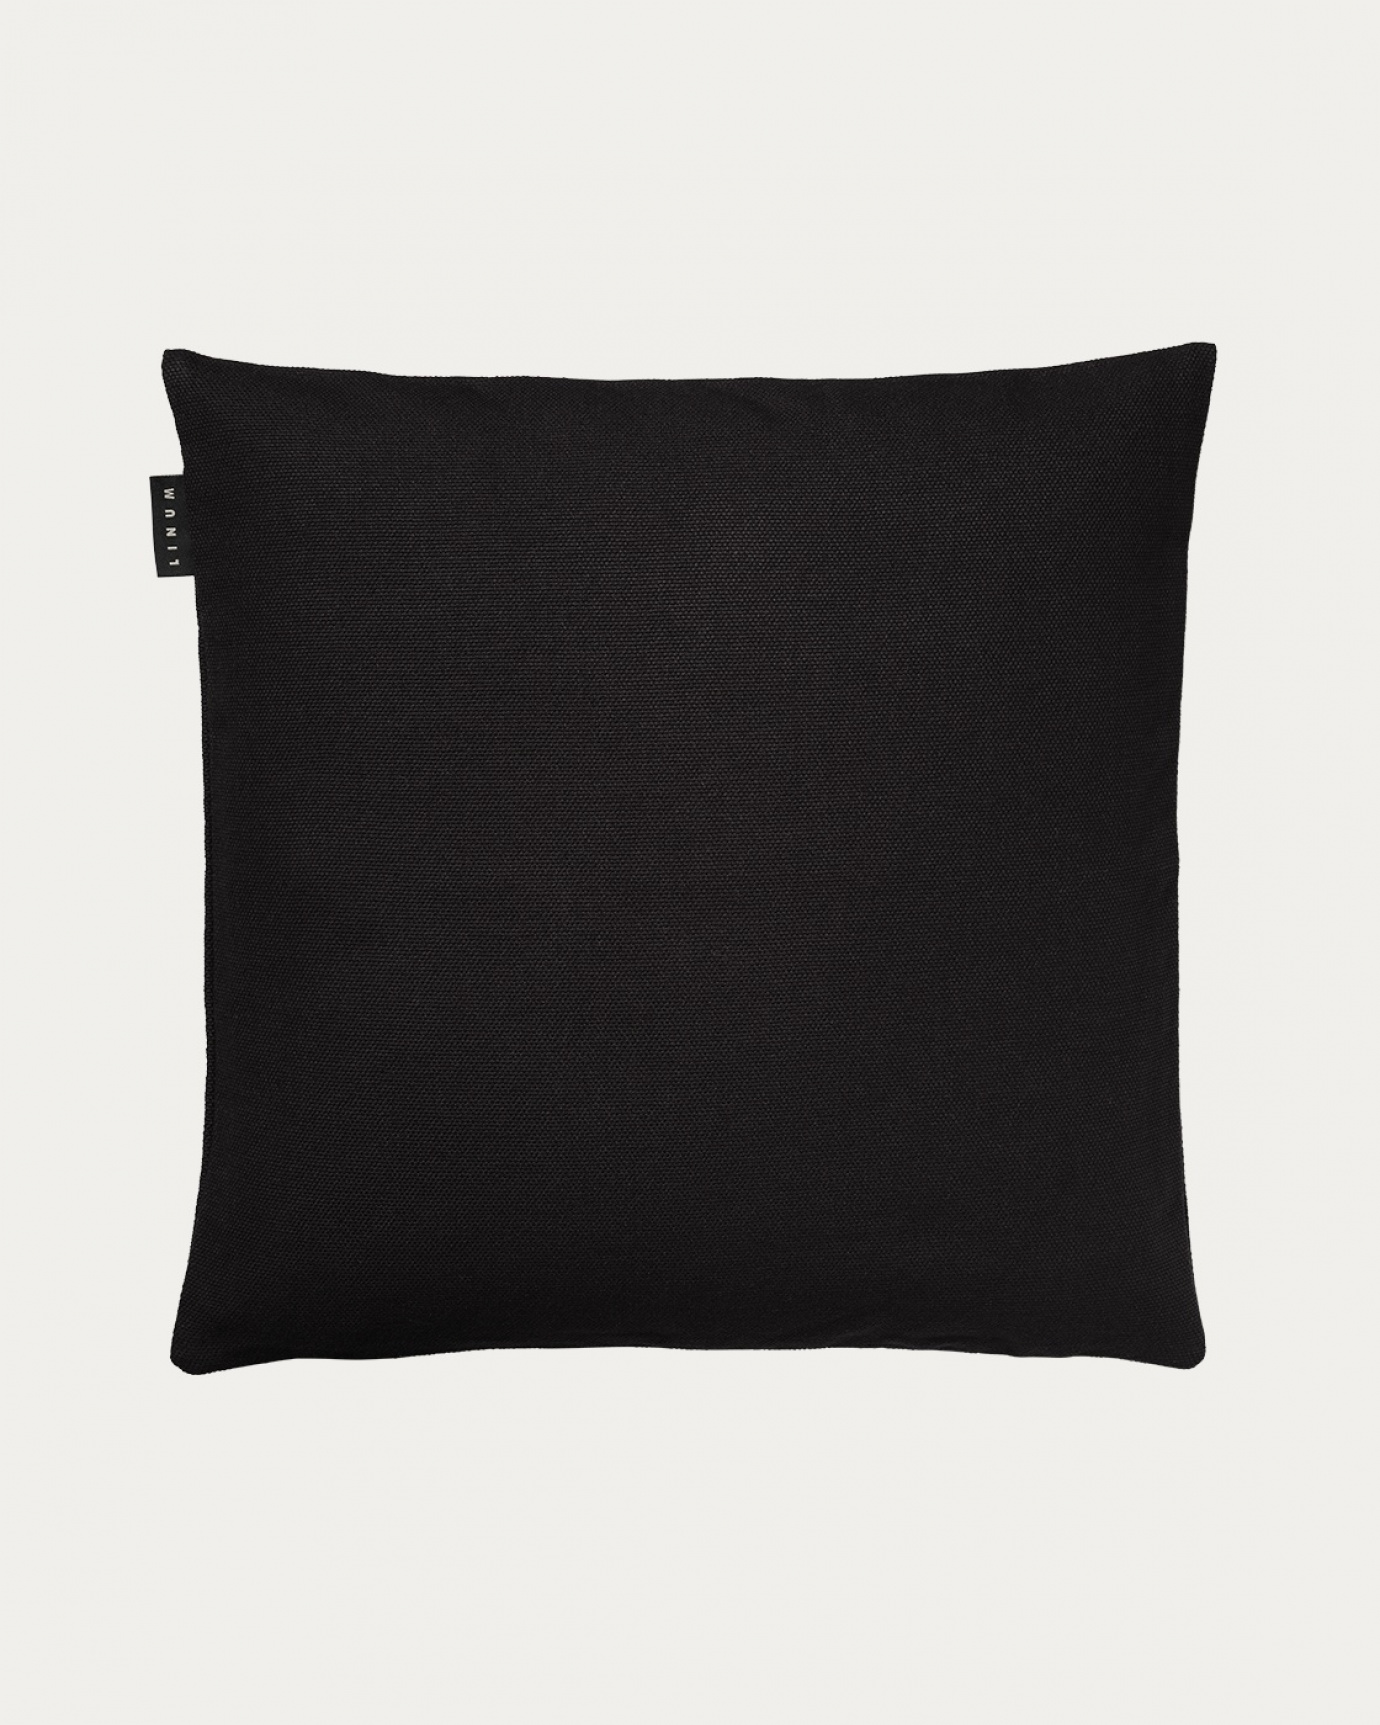 Product image black PEPPER cushion cover made of soft cotton from LINUM DESIGN. Easy to wash and durable for generations. Size 50x50 cm.